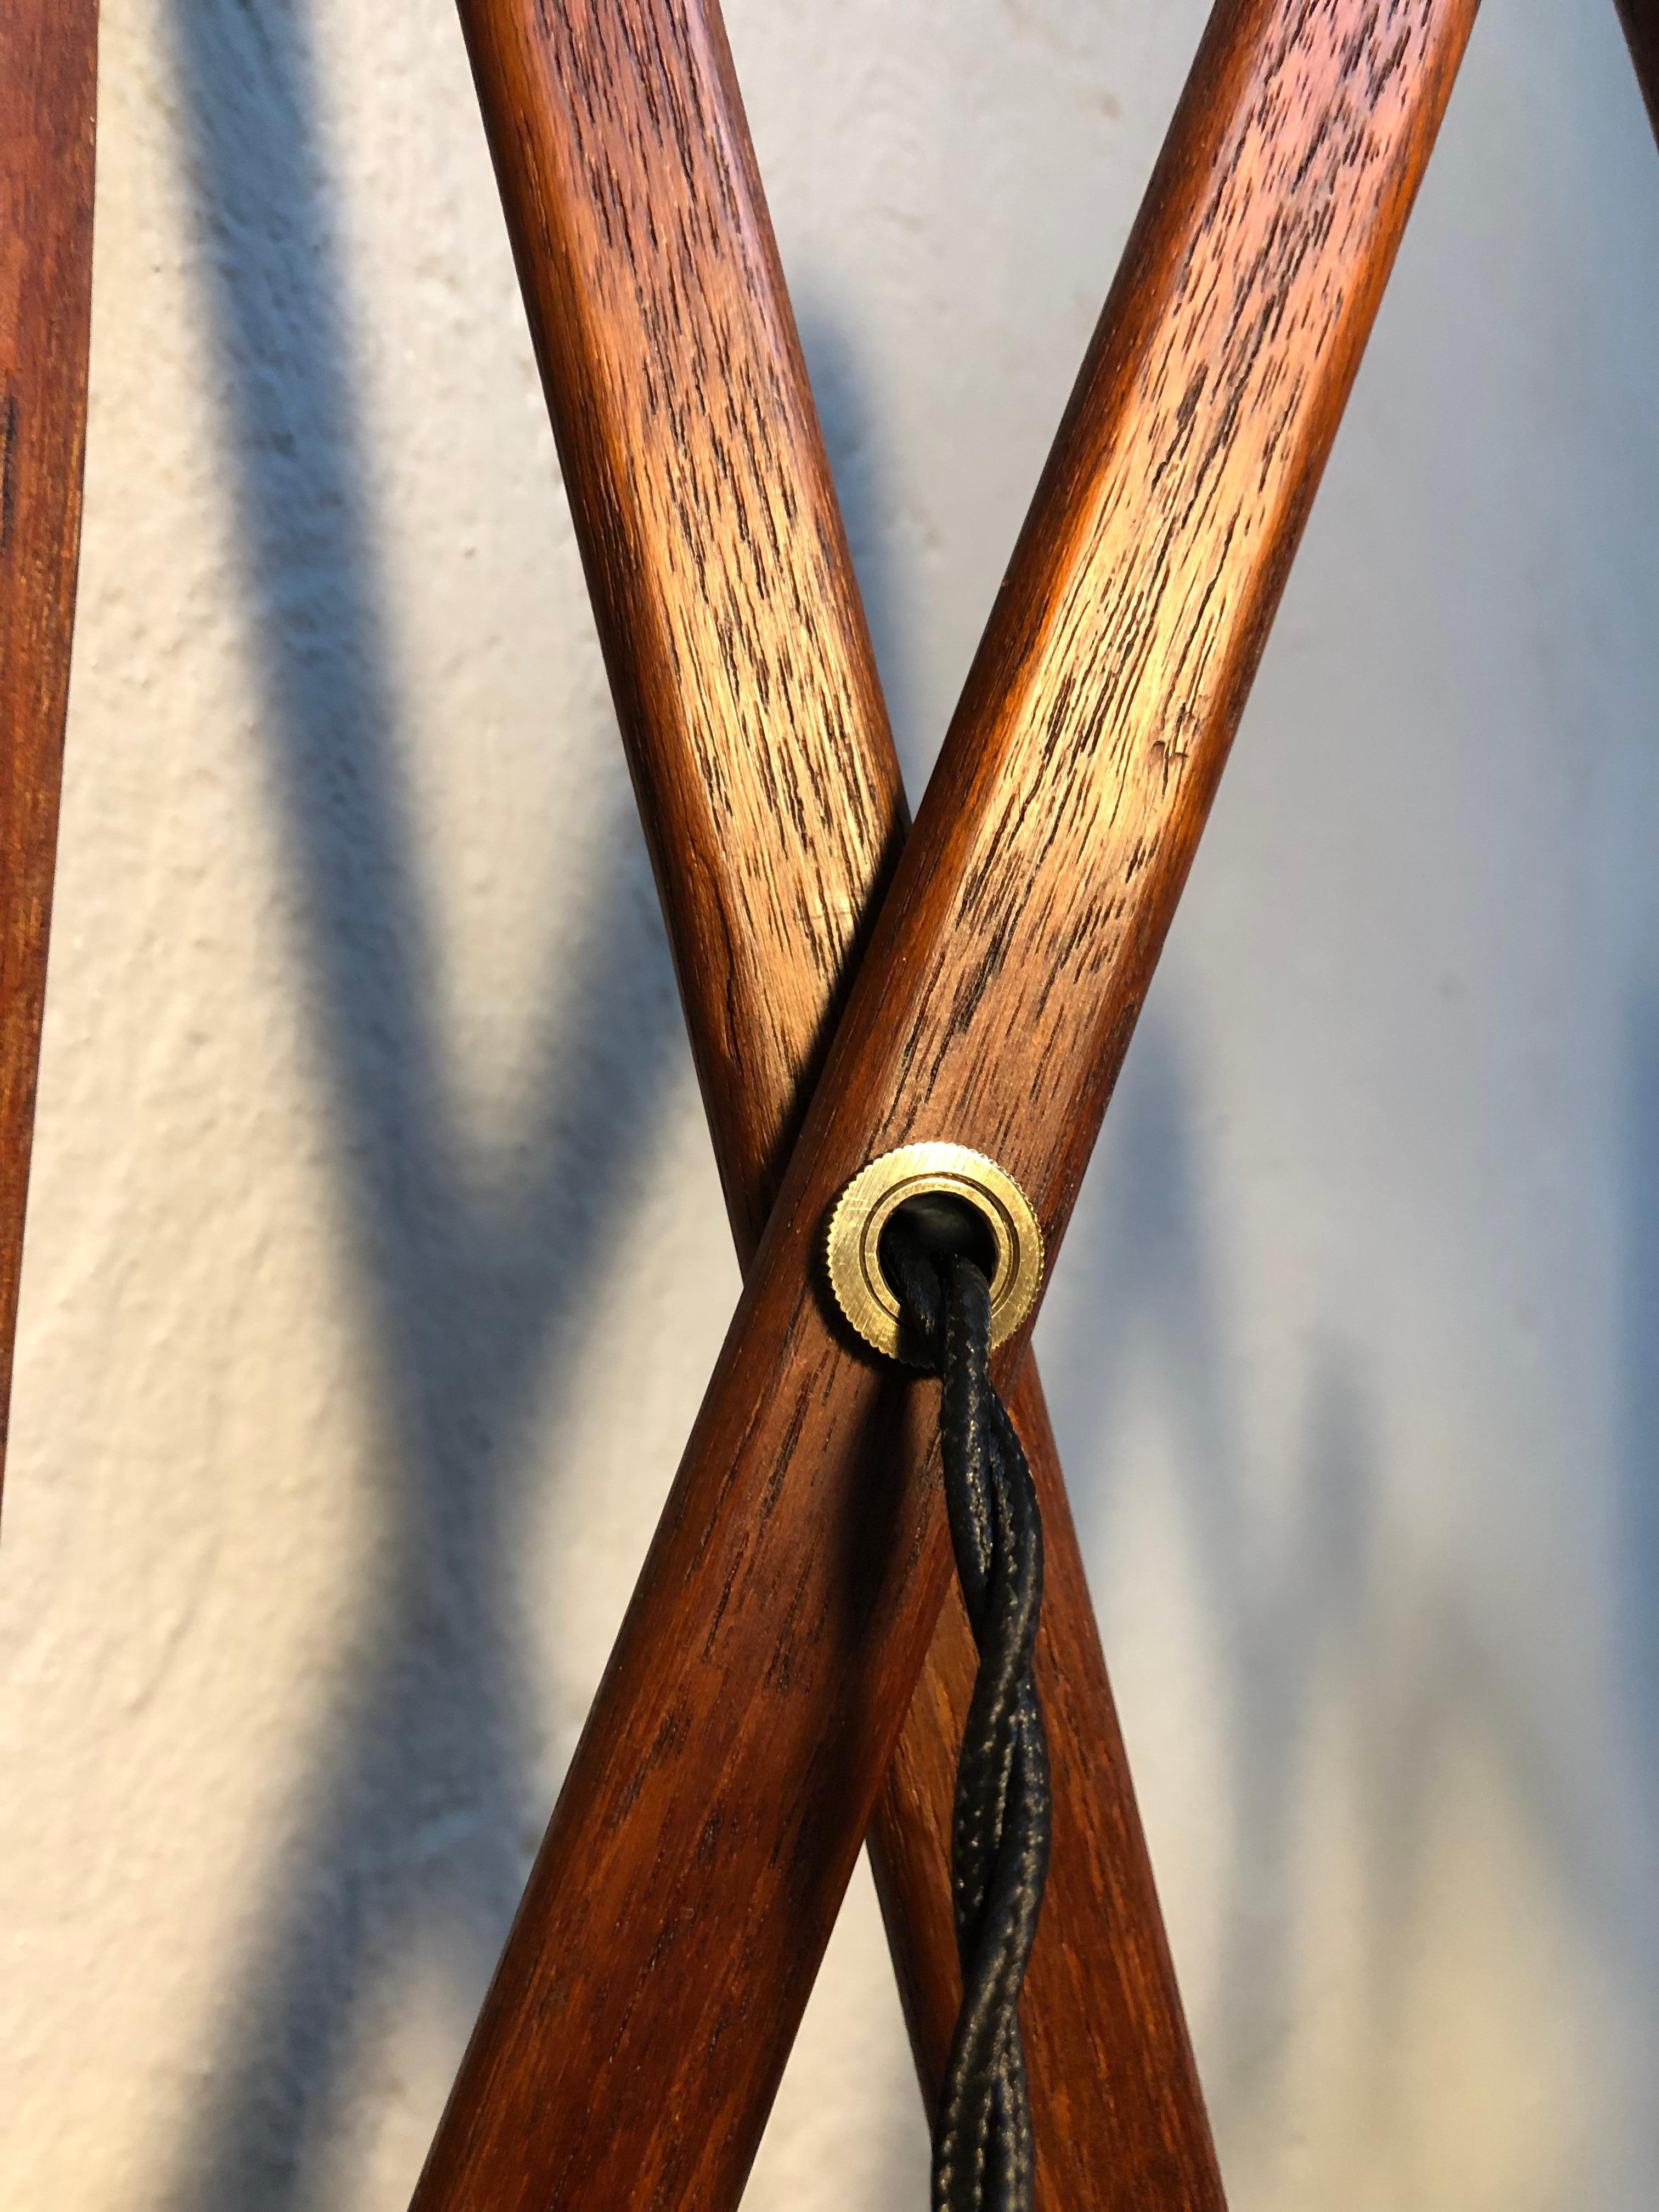 Mid-20th Century Vintage Le Klint Scissor Lamp in Teak from the 1950s For Sale